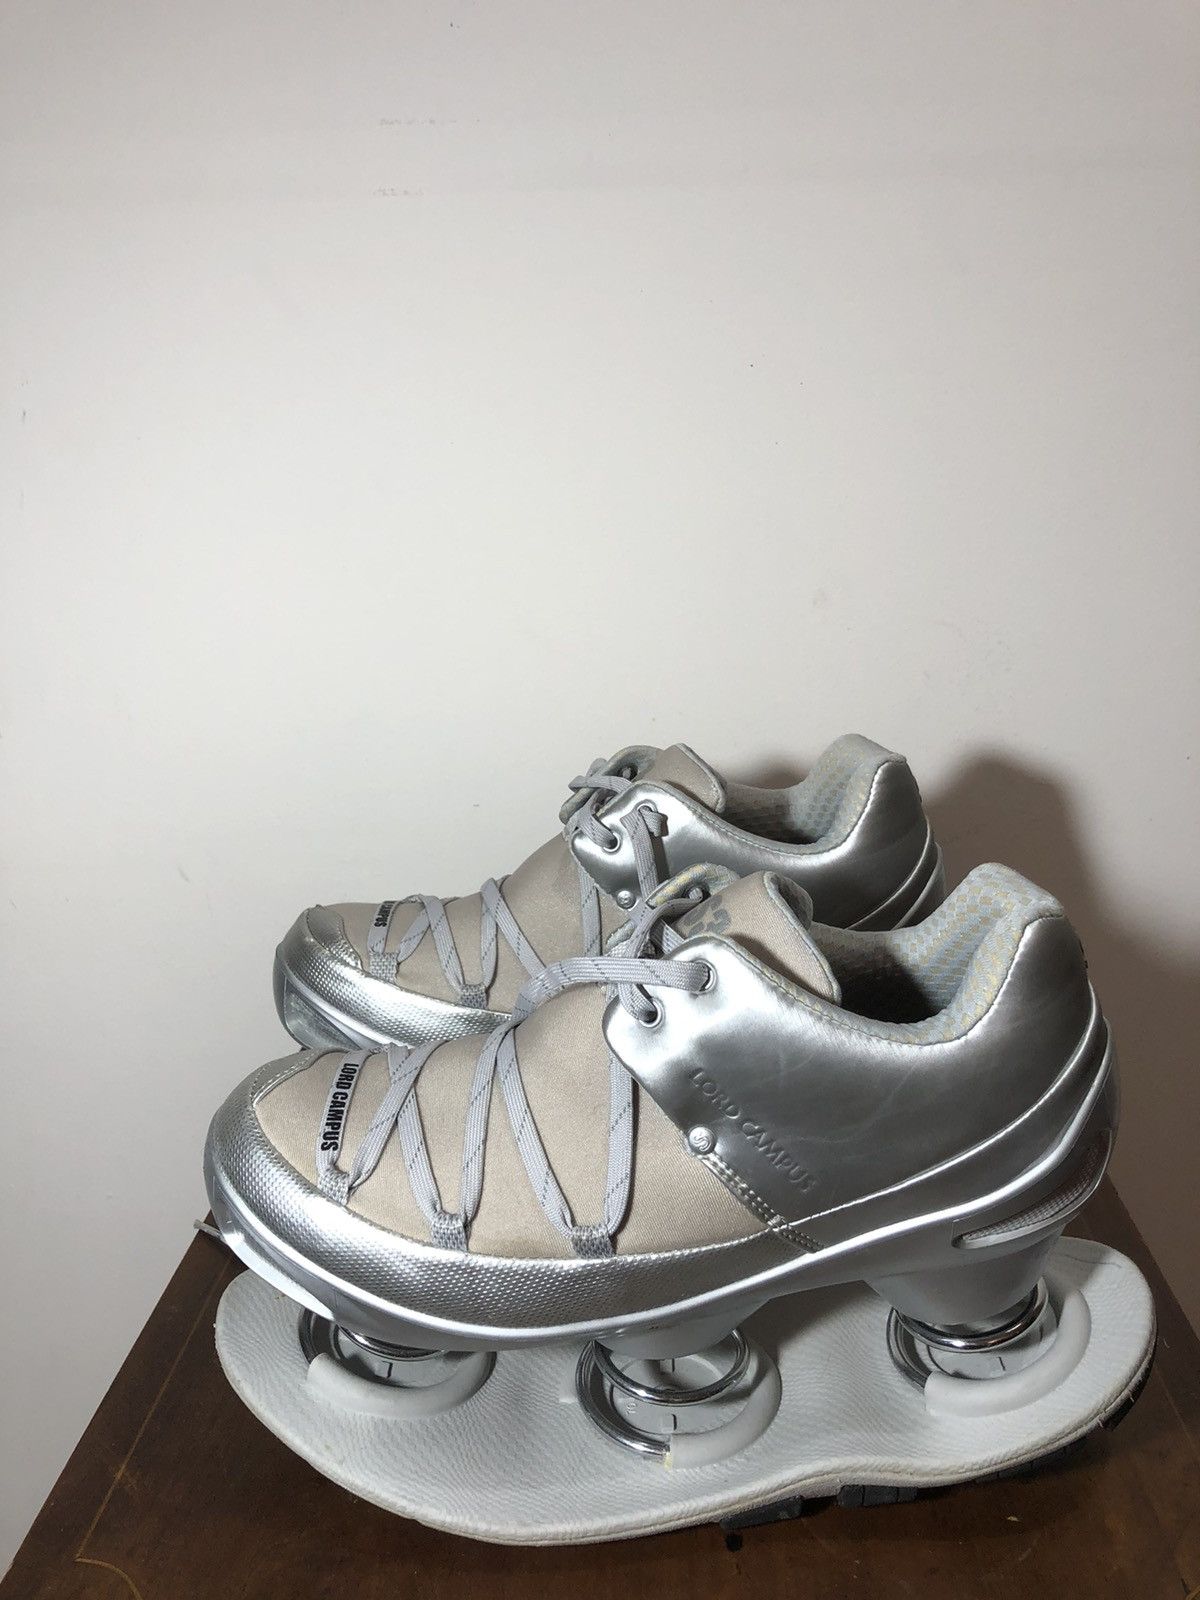 Other Lord Campus Spring Platforms | Grailed